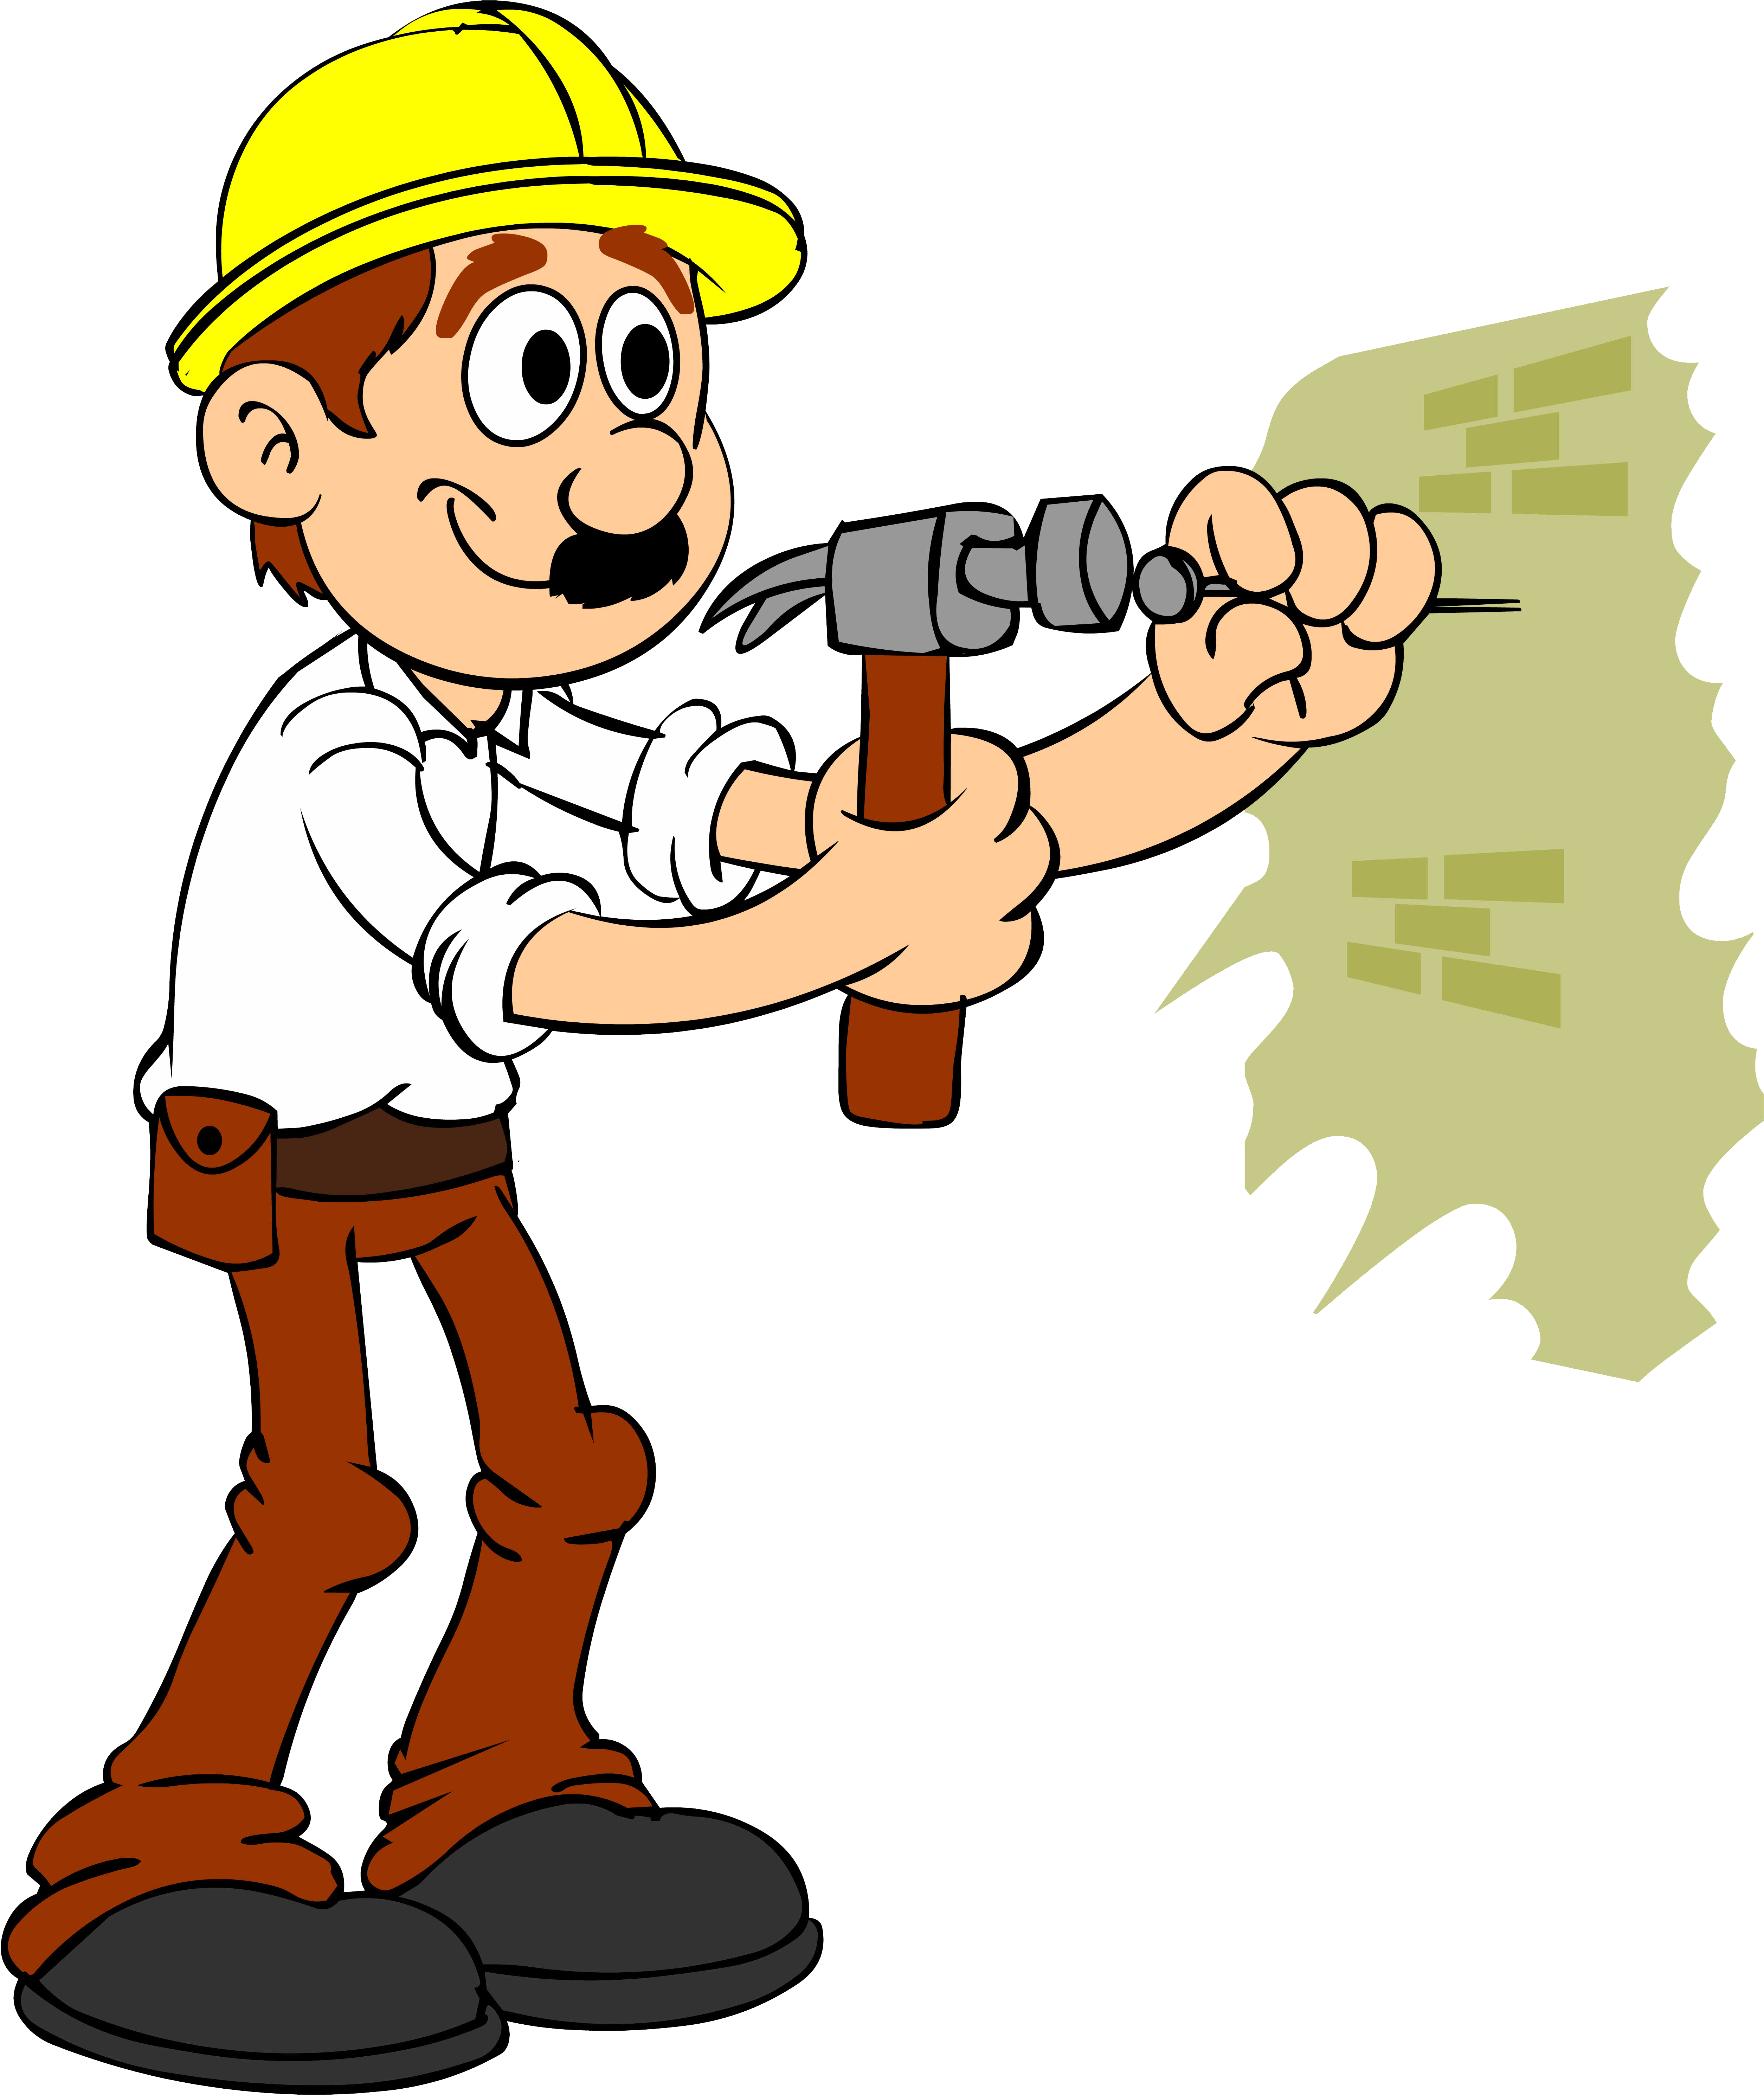 Handyman Business, House Builder, Specialty Contractor - Cartoon, Hd Png Download